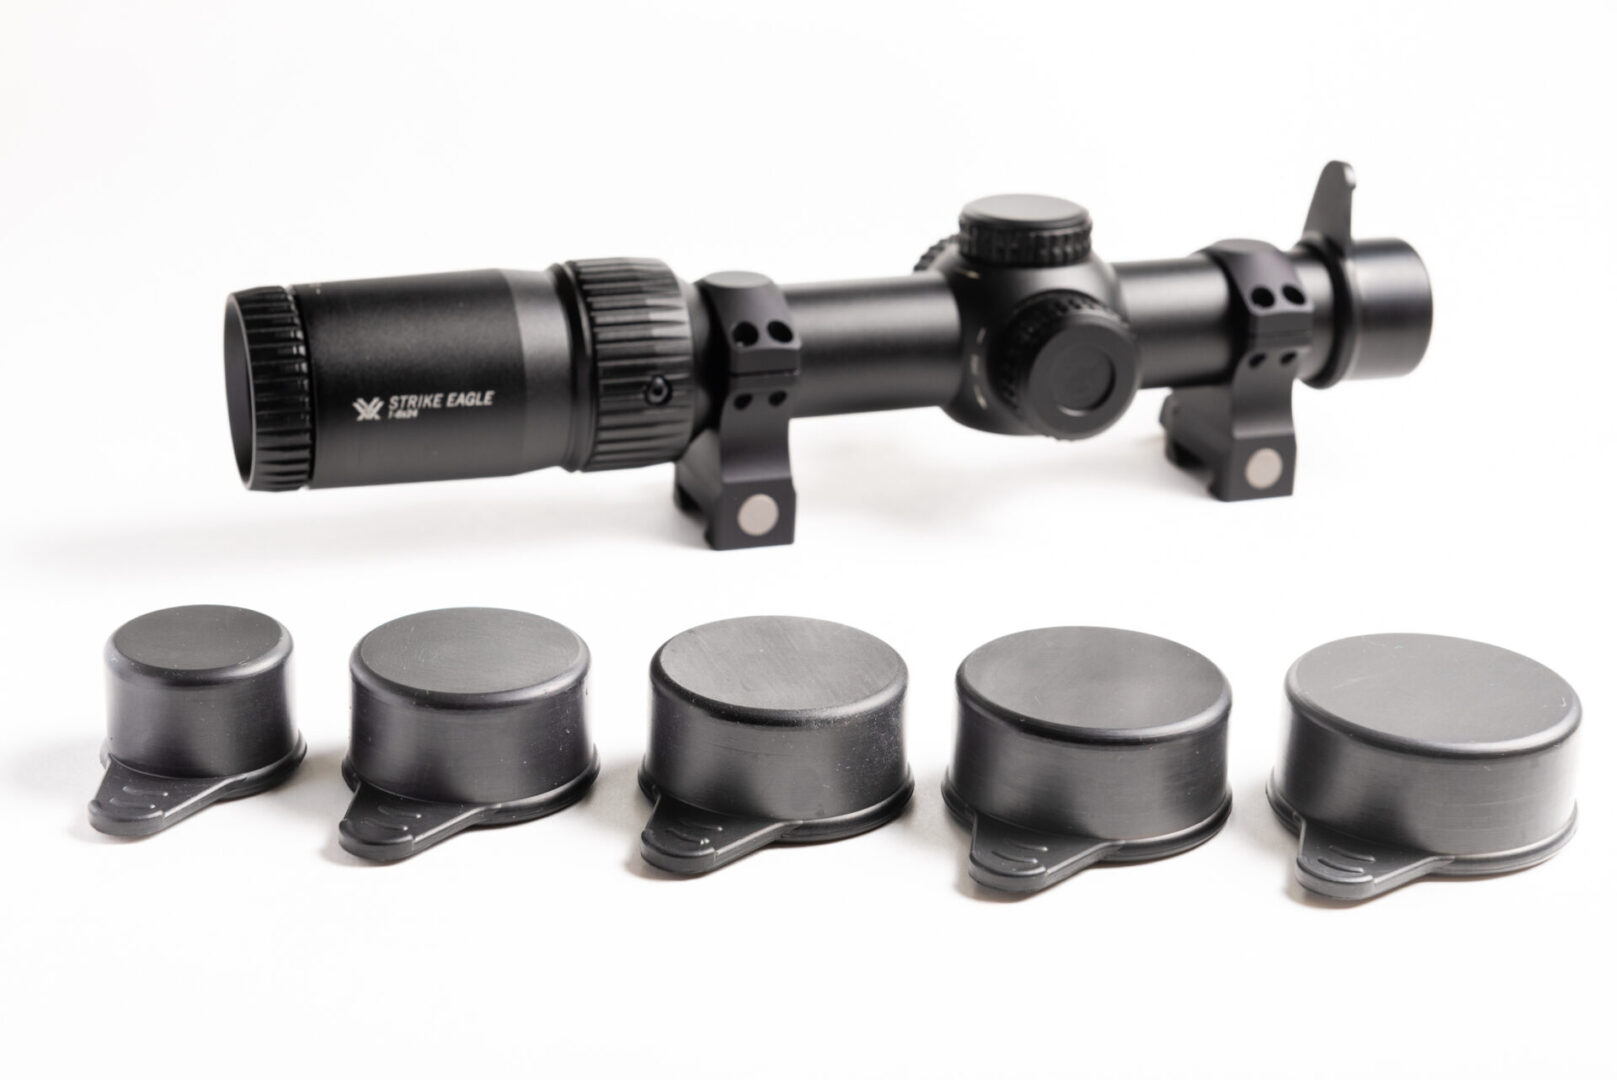 A rifle scope and seven different sized caps.